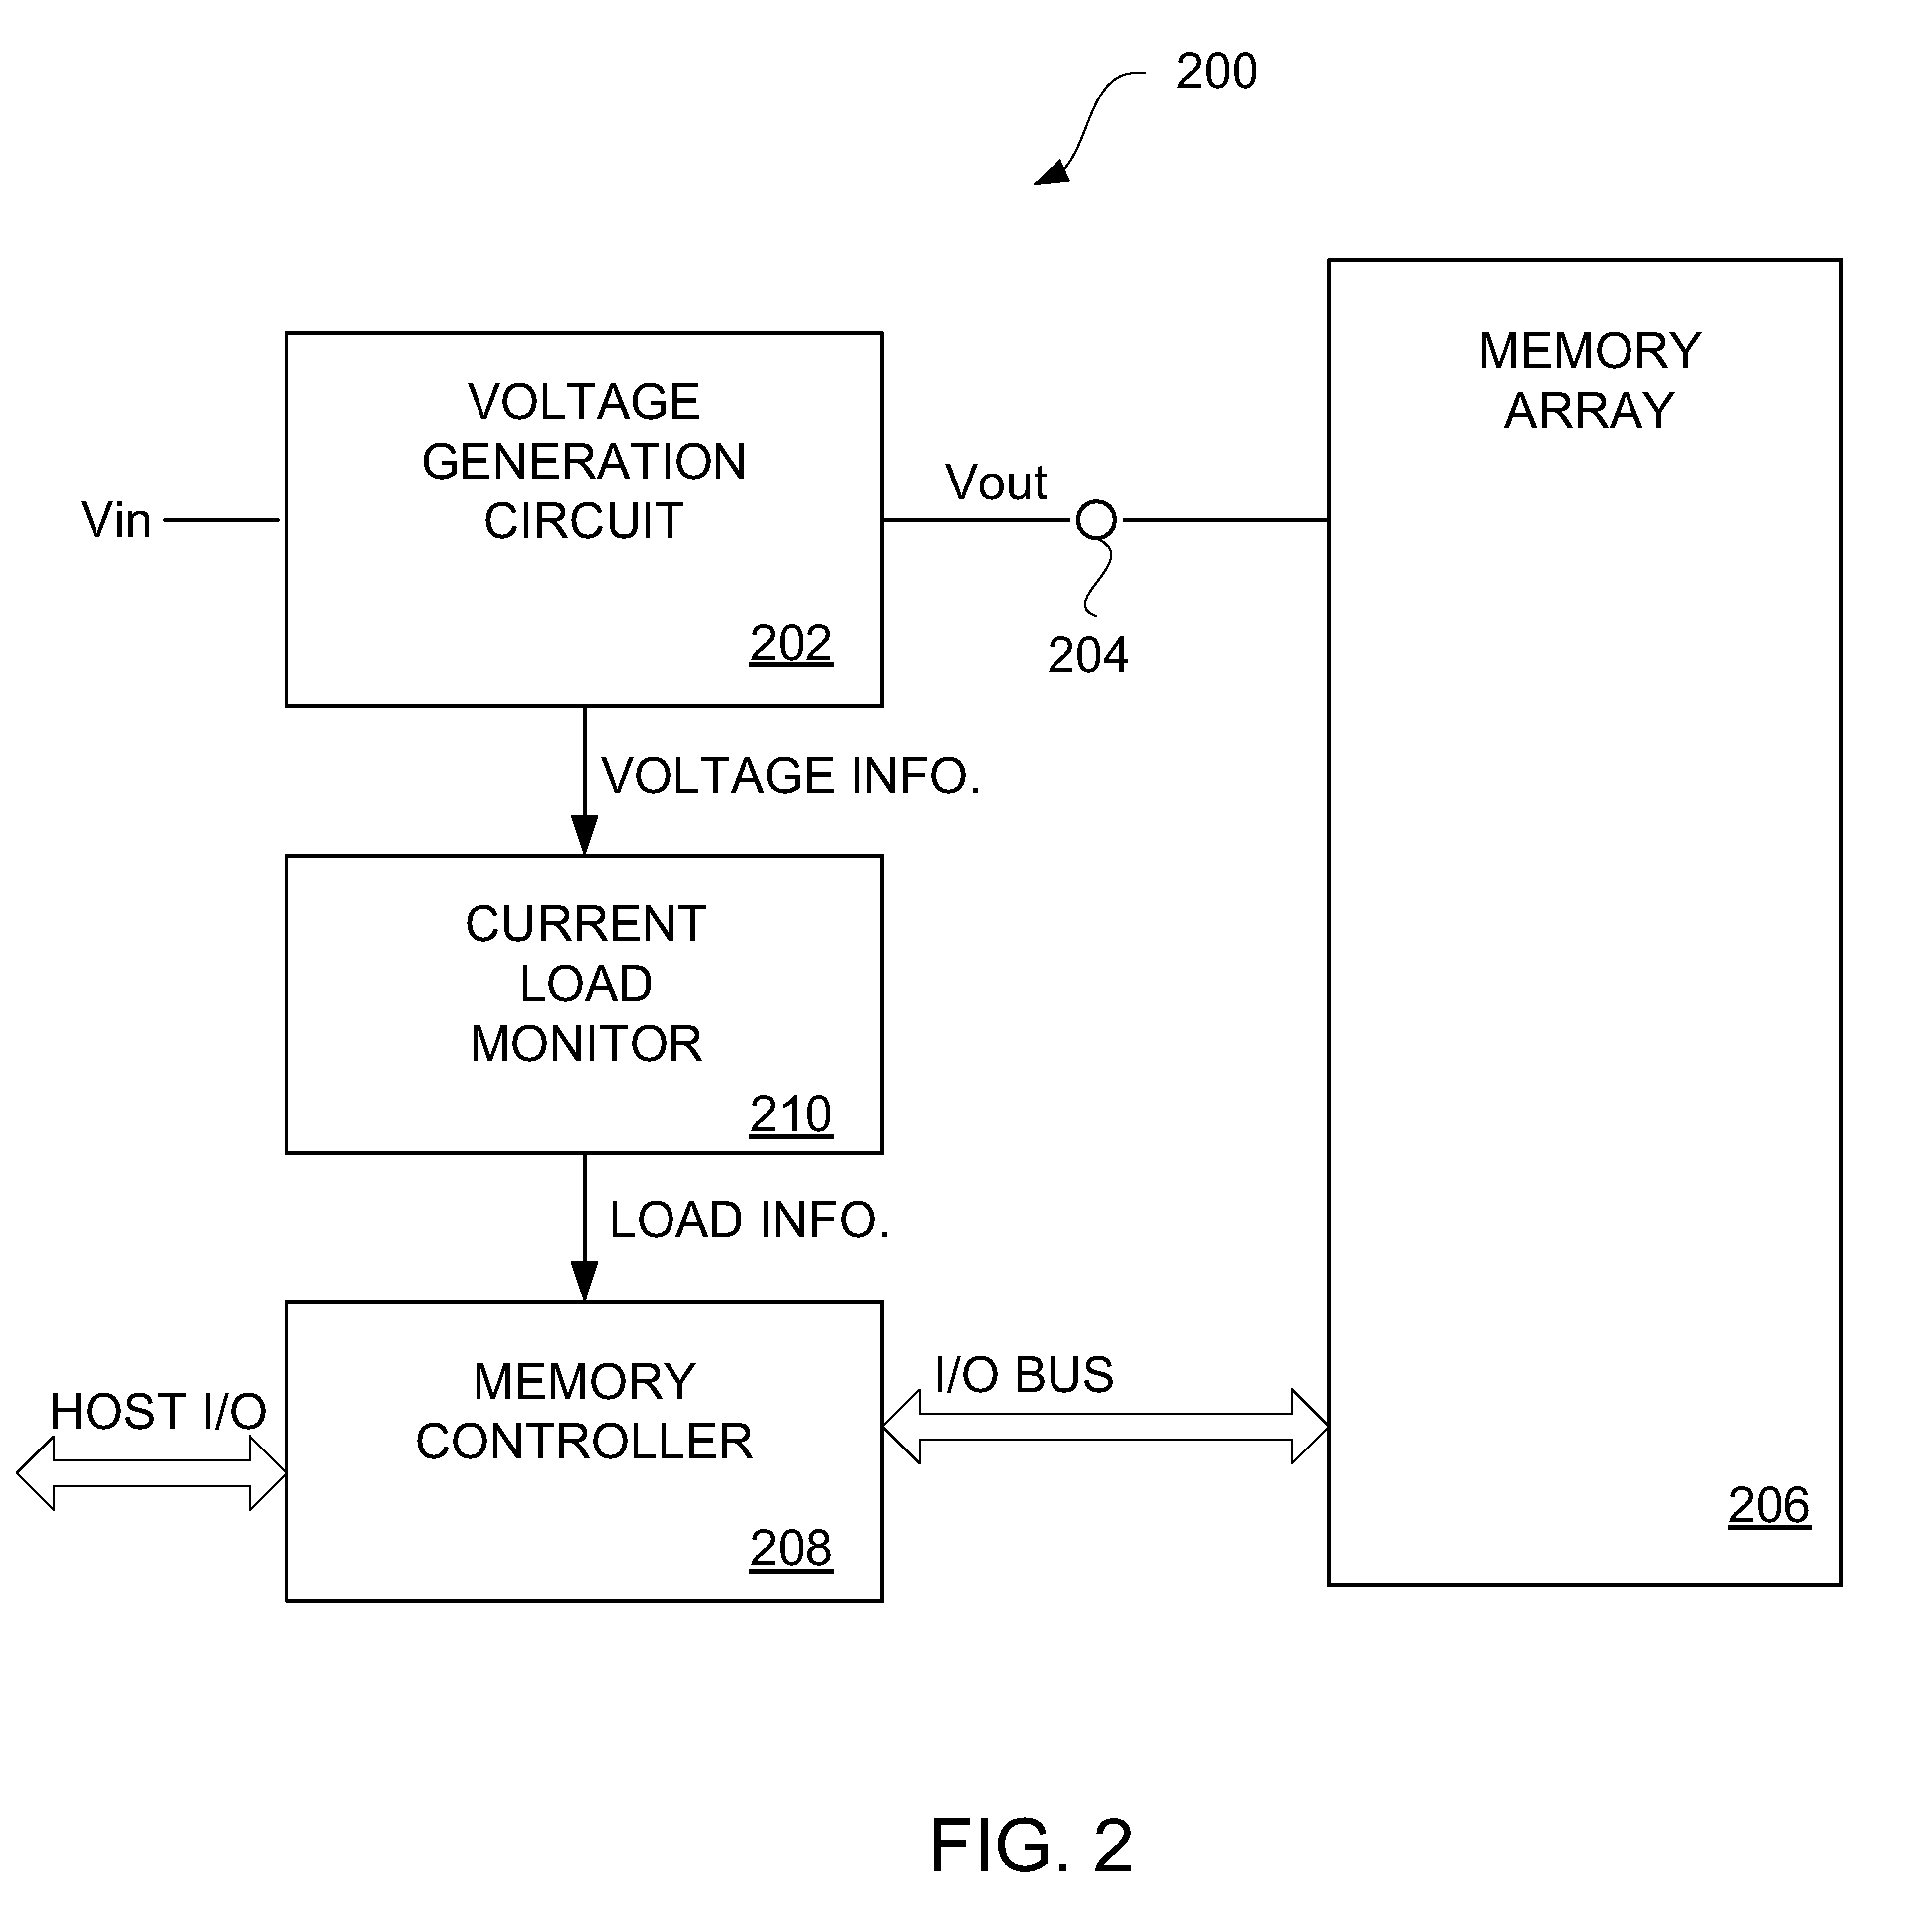 Load Management for Memory Device